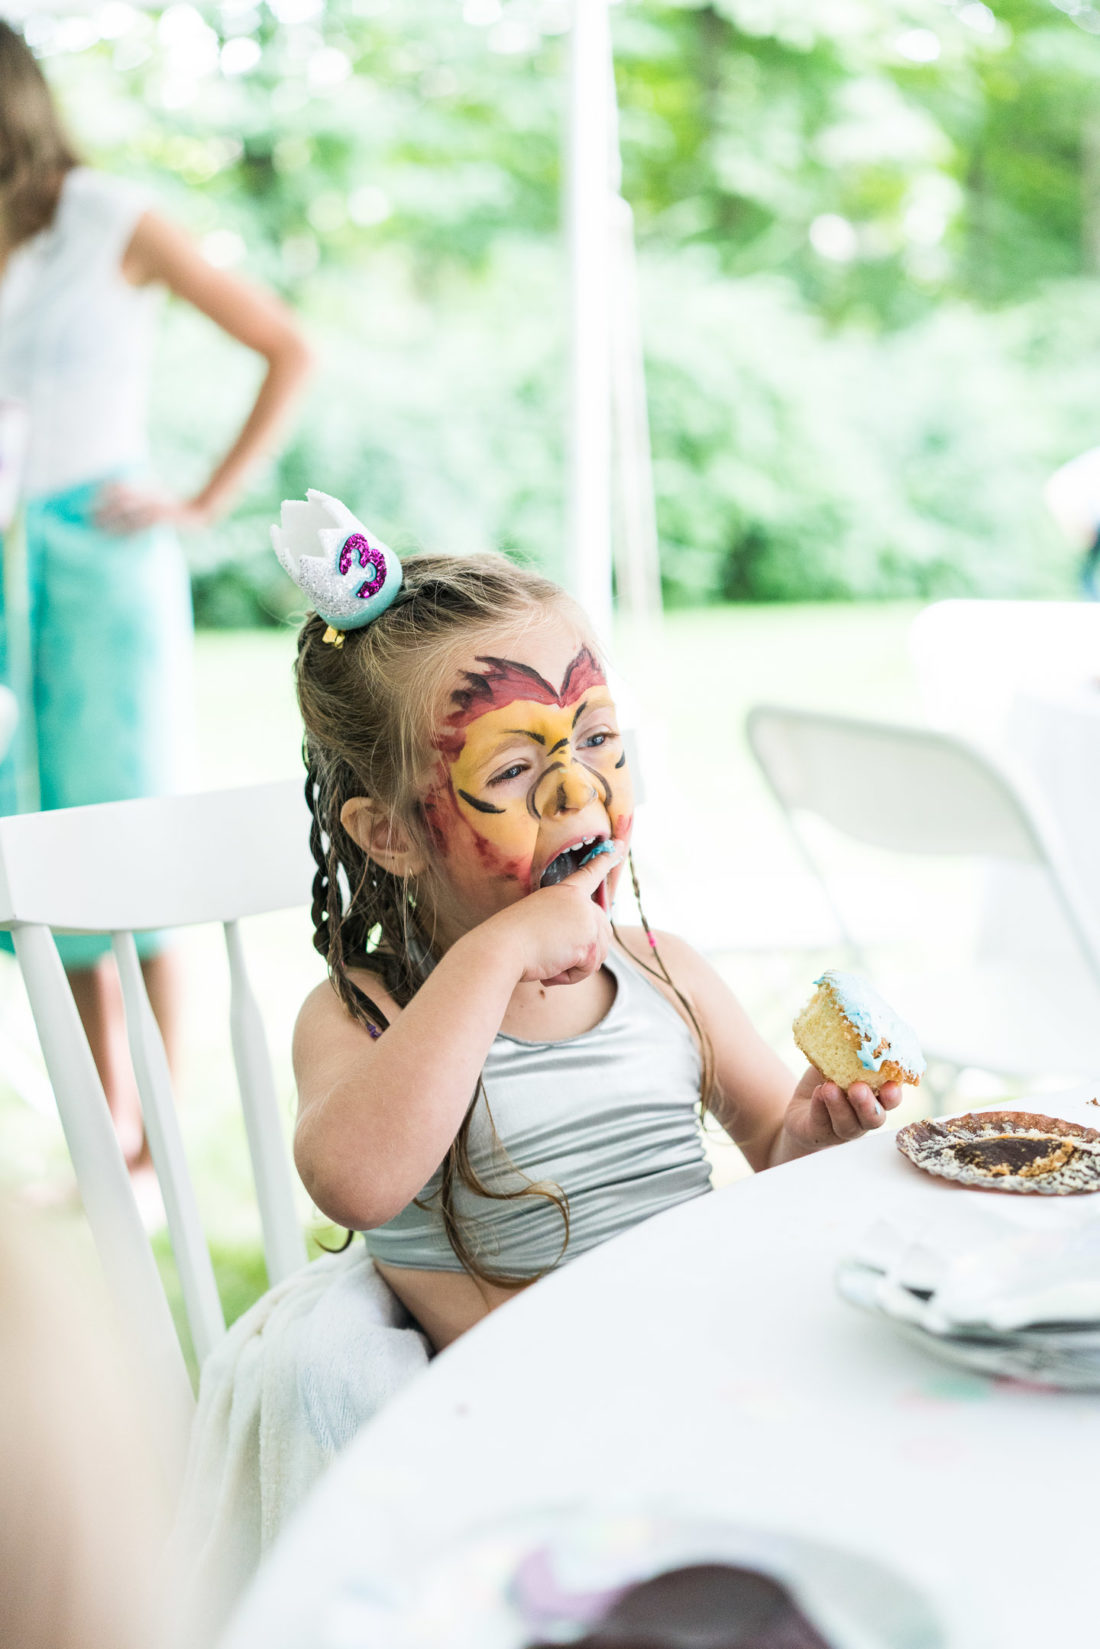 Marlowe Martino digs in to a birthday cupcake at her third birthday party